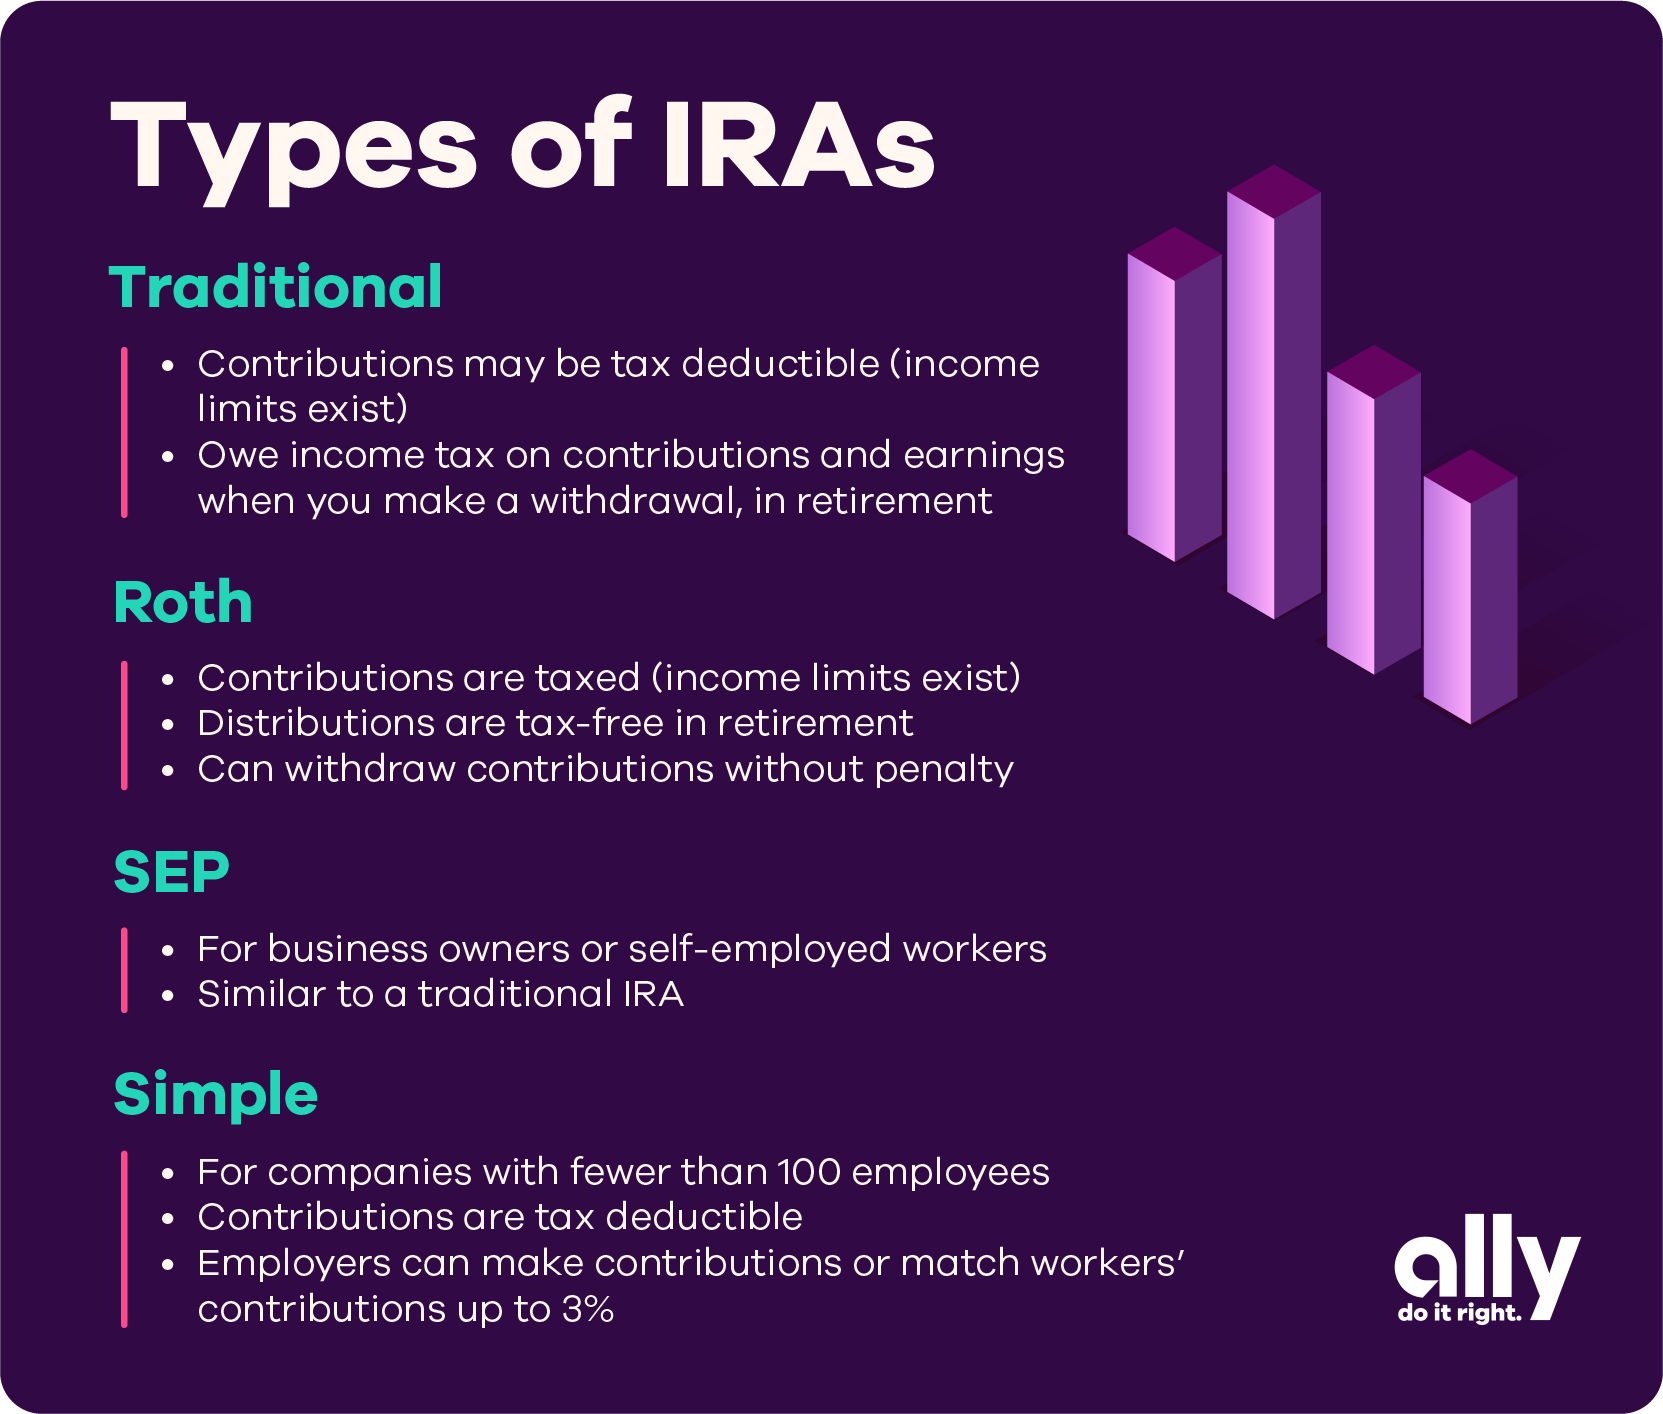 Types of IRAs - (Traditional)-Contributions may be tax deductible (income limits exist), owe income tax on contributions and earnings when you make a withdrawal in retirement. (Roth)-Contributions are taxed, (income limits exist),  distributions are tax-free in retirement, can withdraw contributions without penalty. (SEP)-For business owners or self-employed workers, similar to a traditional IRA. (Simple)-For companies with fewer than 100 employees, contributions are tax-deductible; employers can make contributions or match workers’ contributions up to 3%.